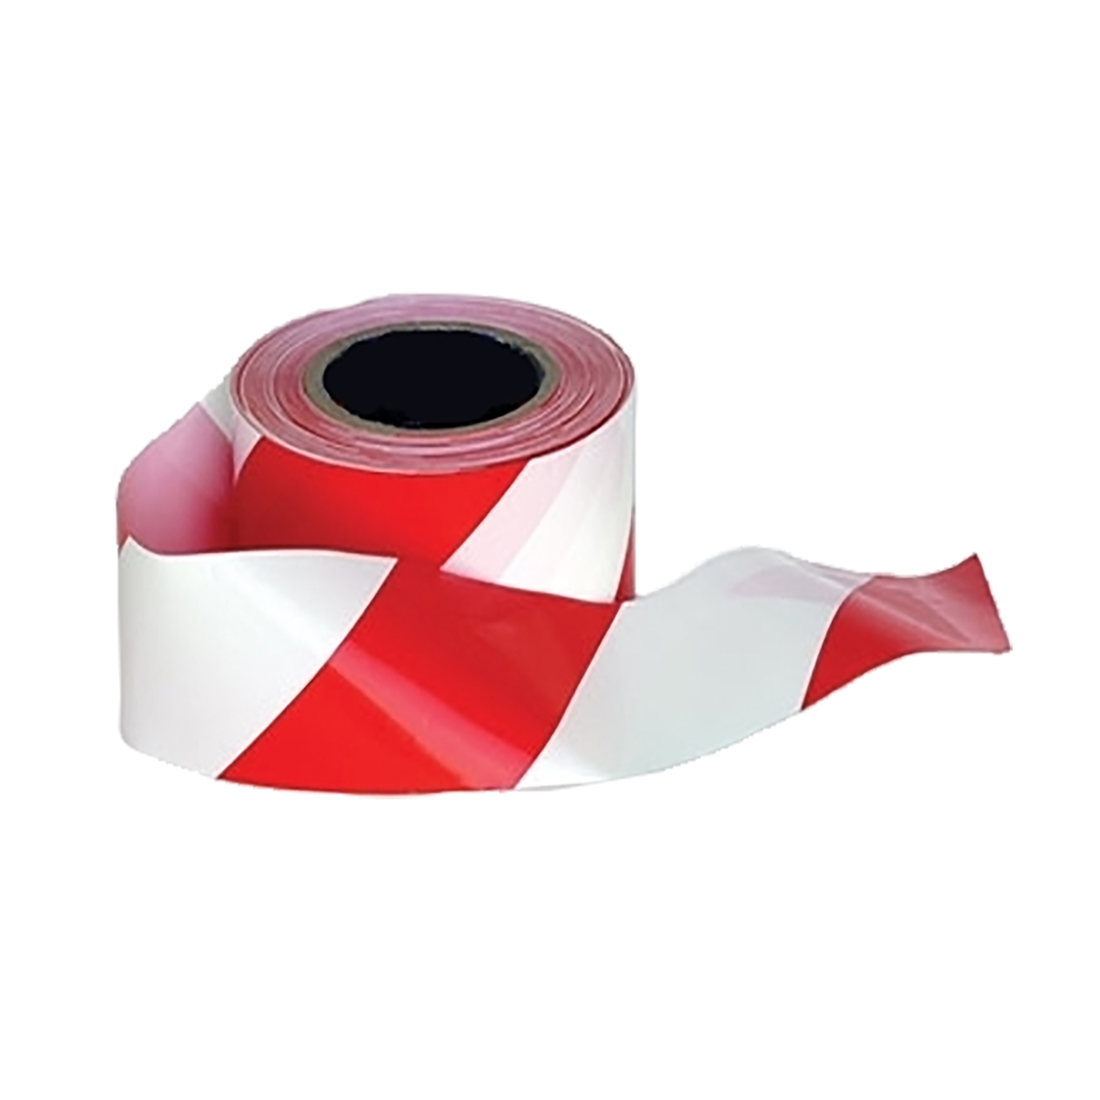 Barricade/Warning Tape Size  Red/White